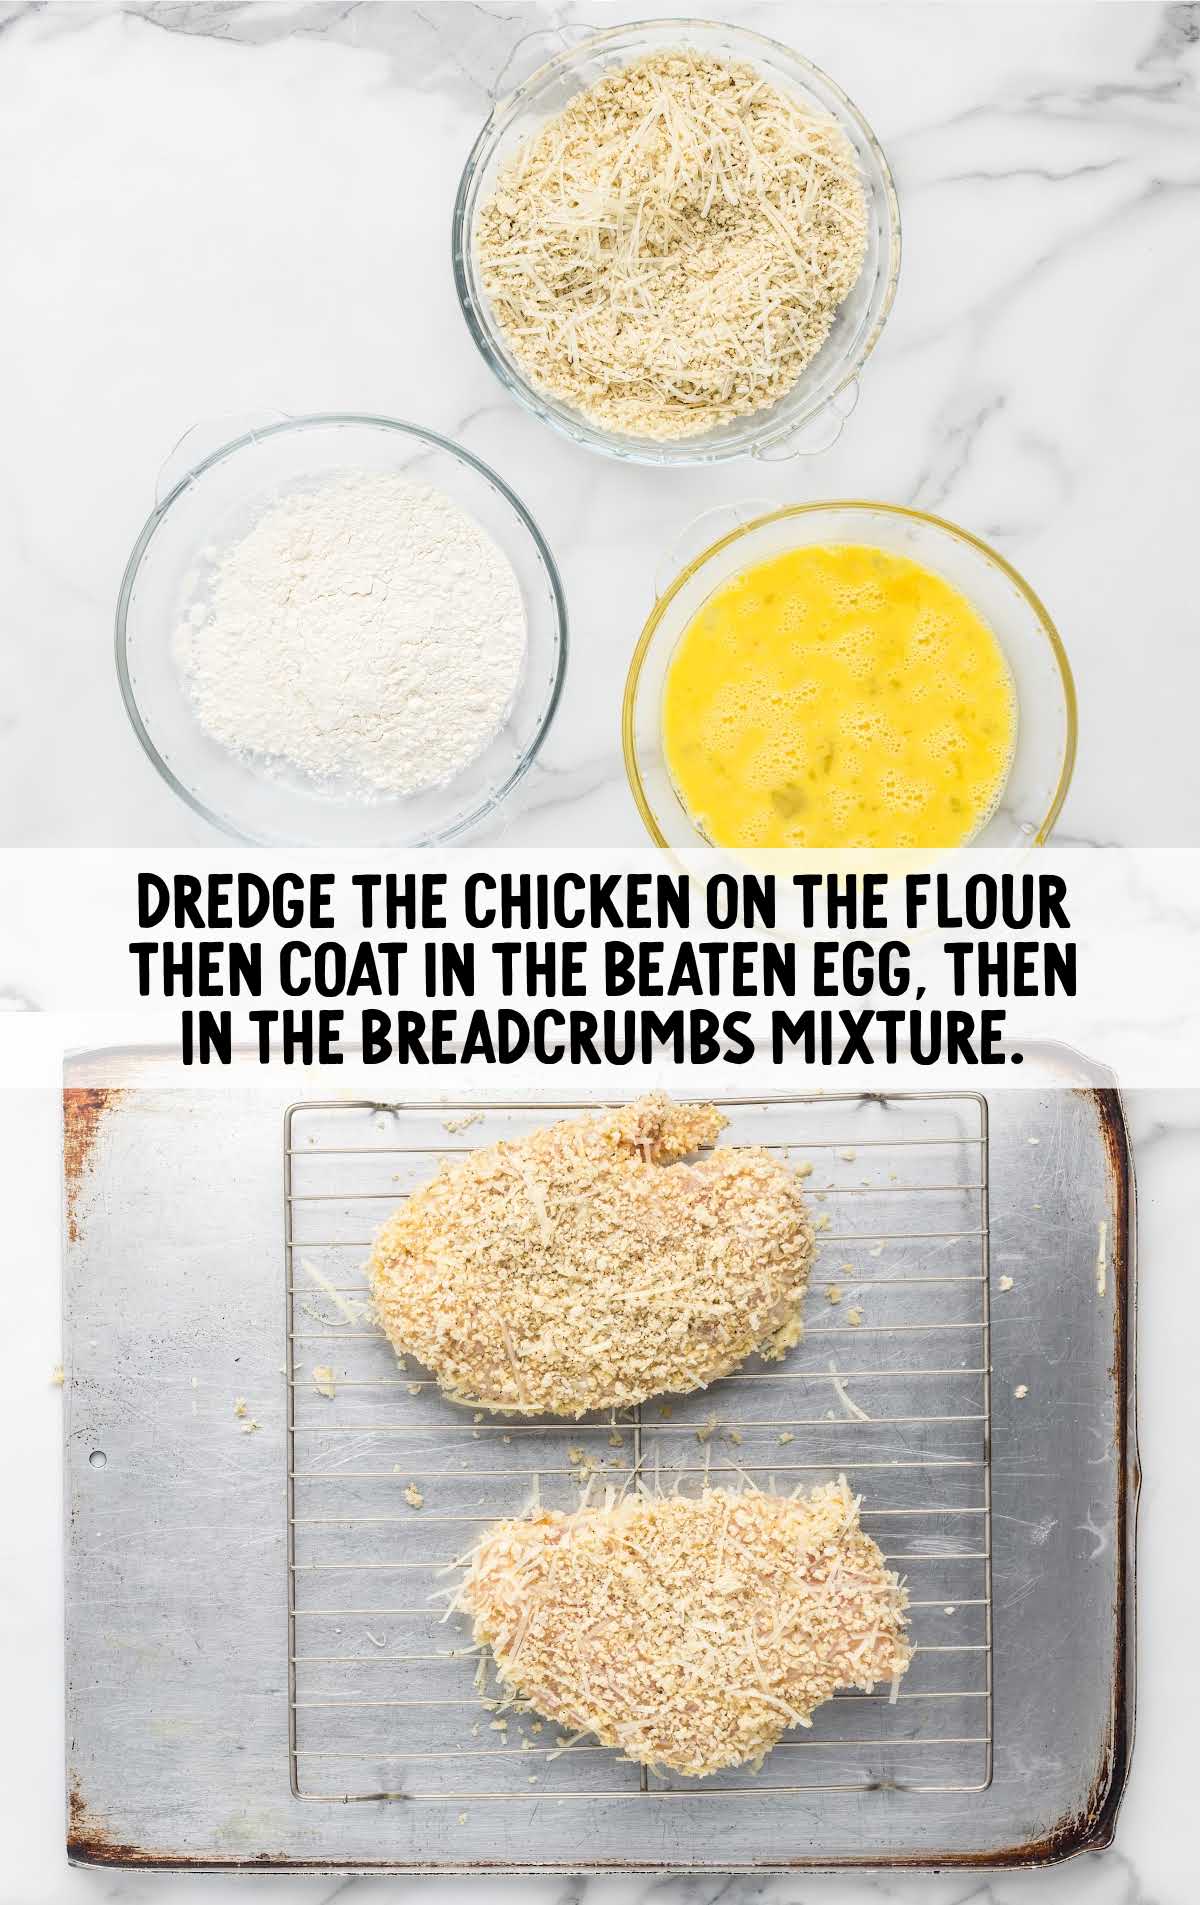 chicken dredge on the flour, eggs and breadcrumbs mixture